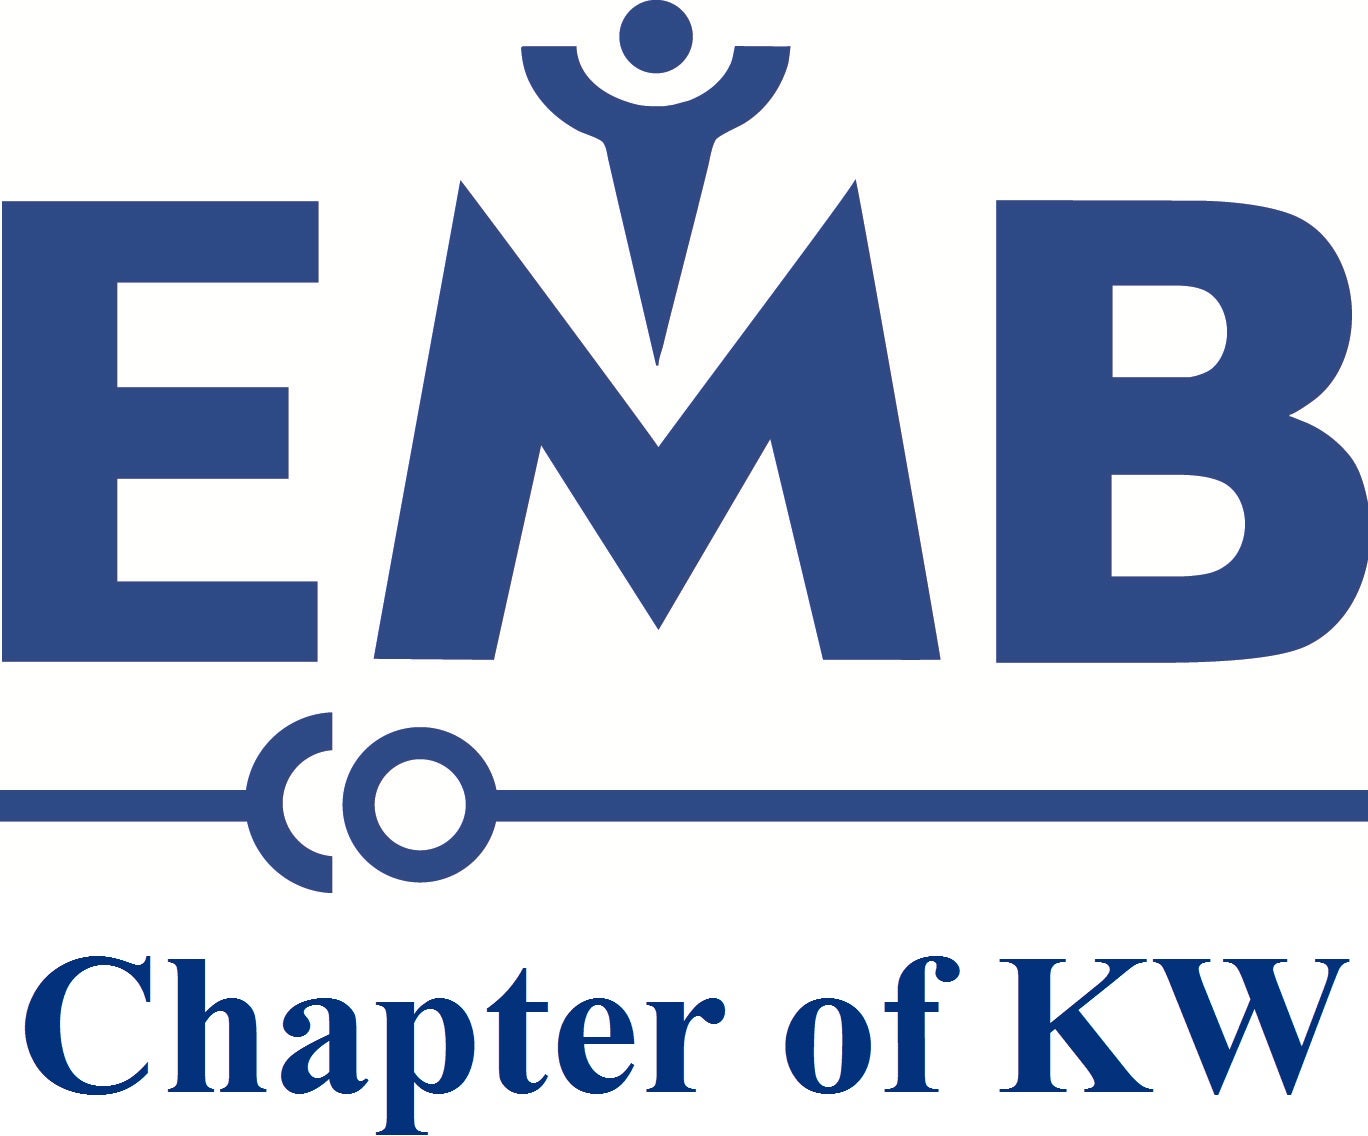 EMB chapter of KW